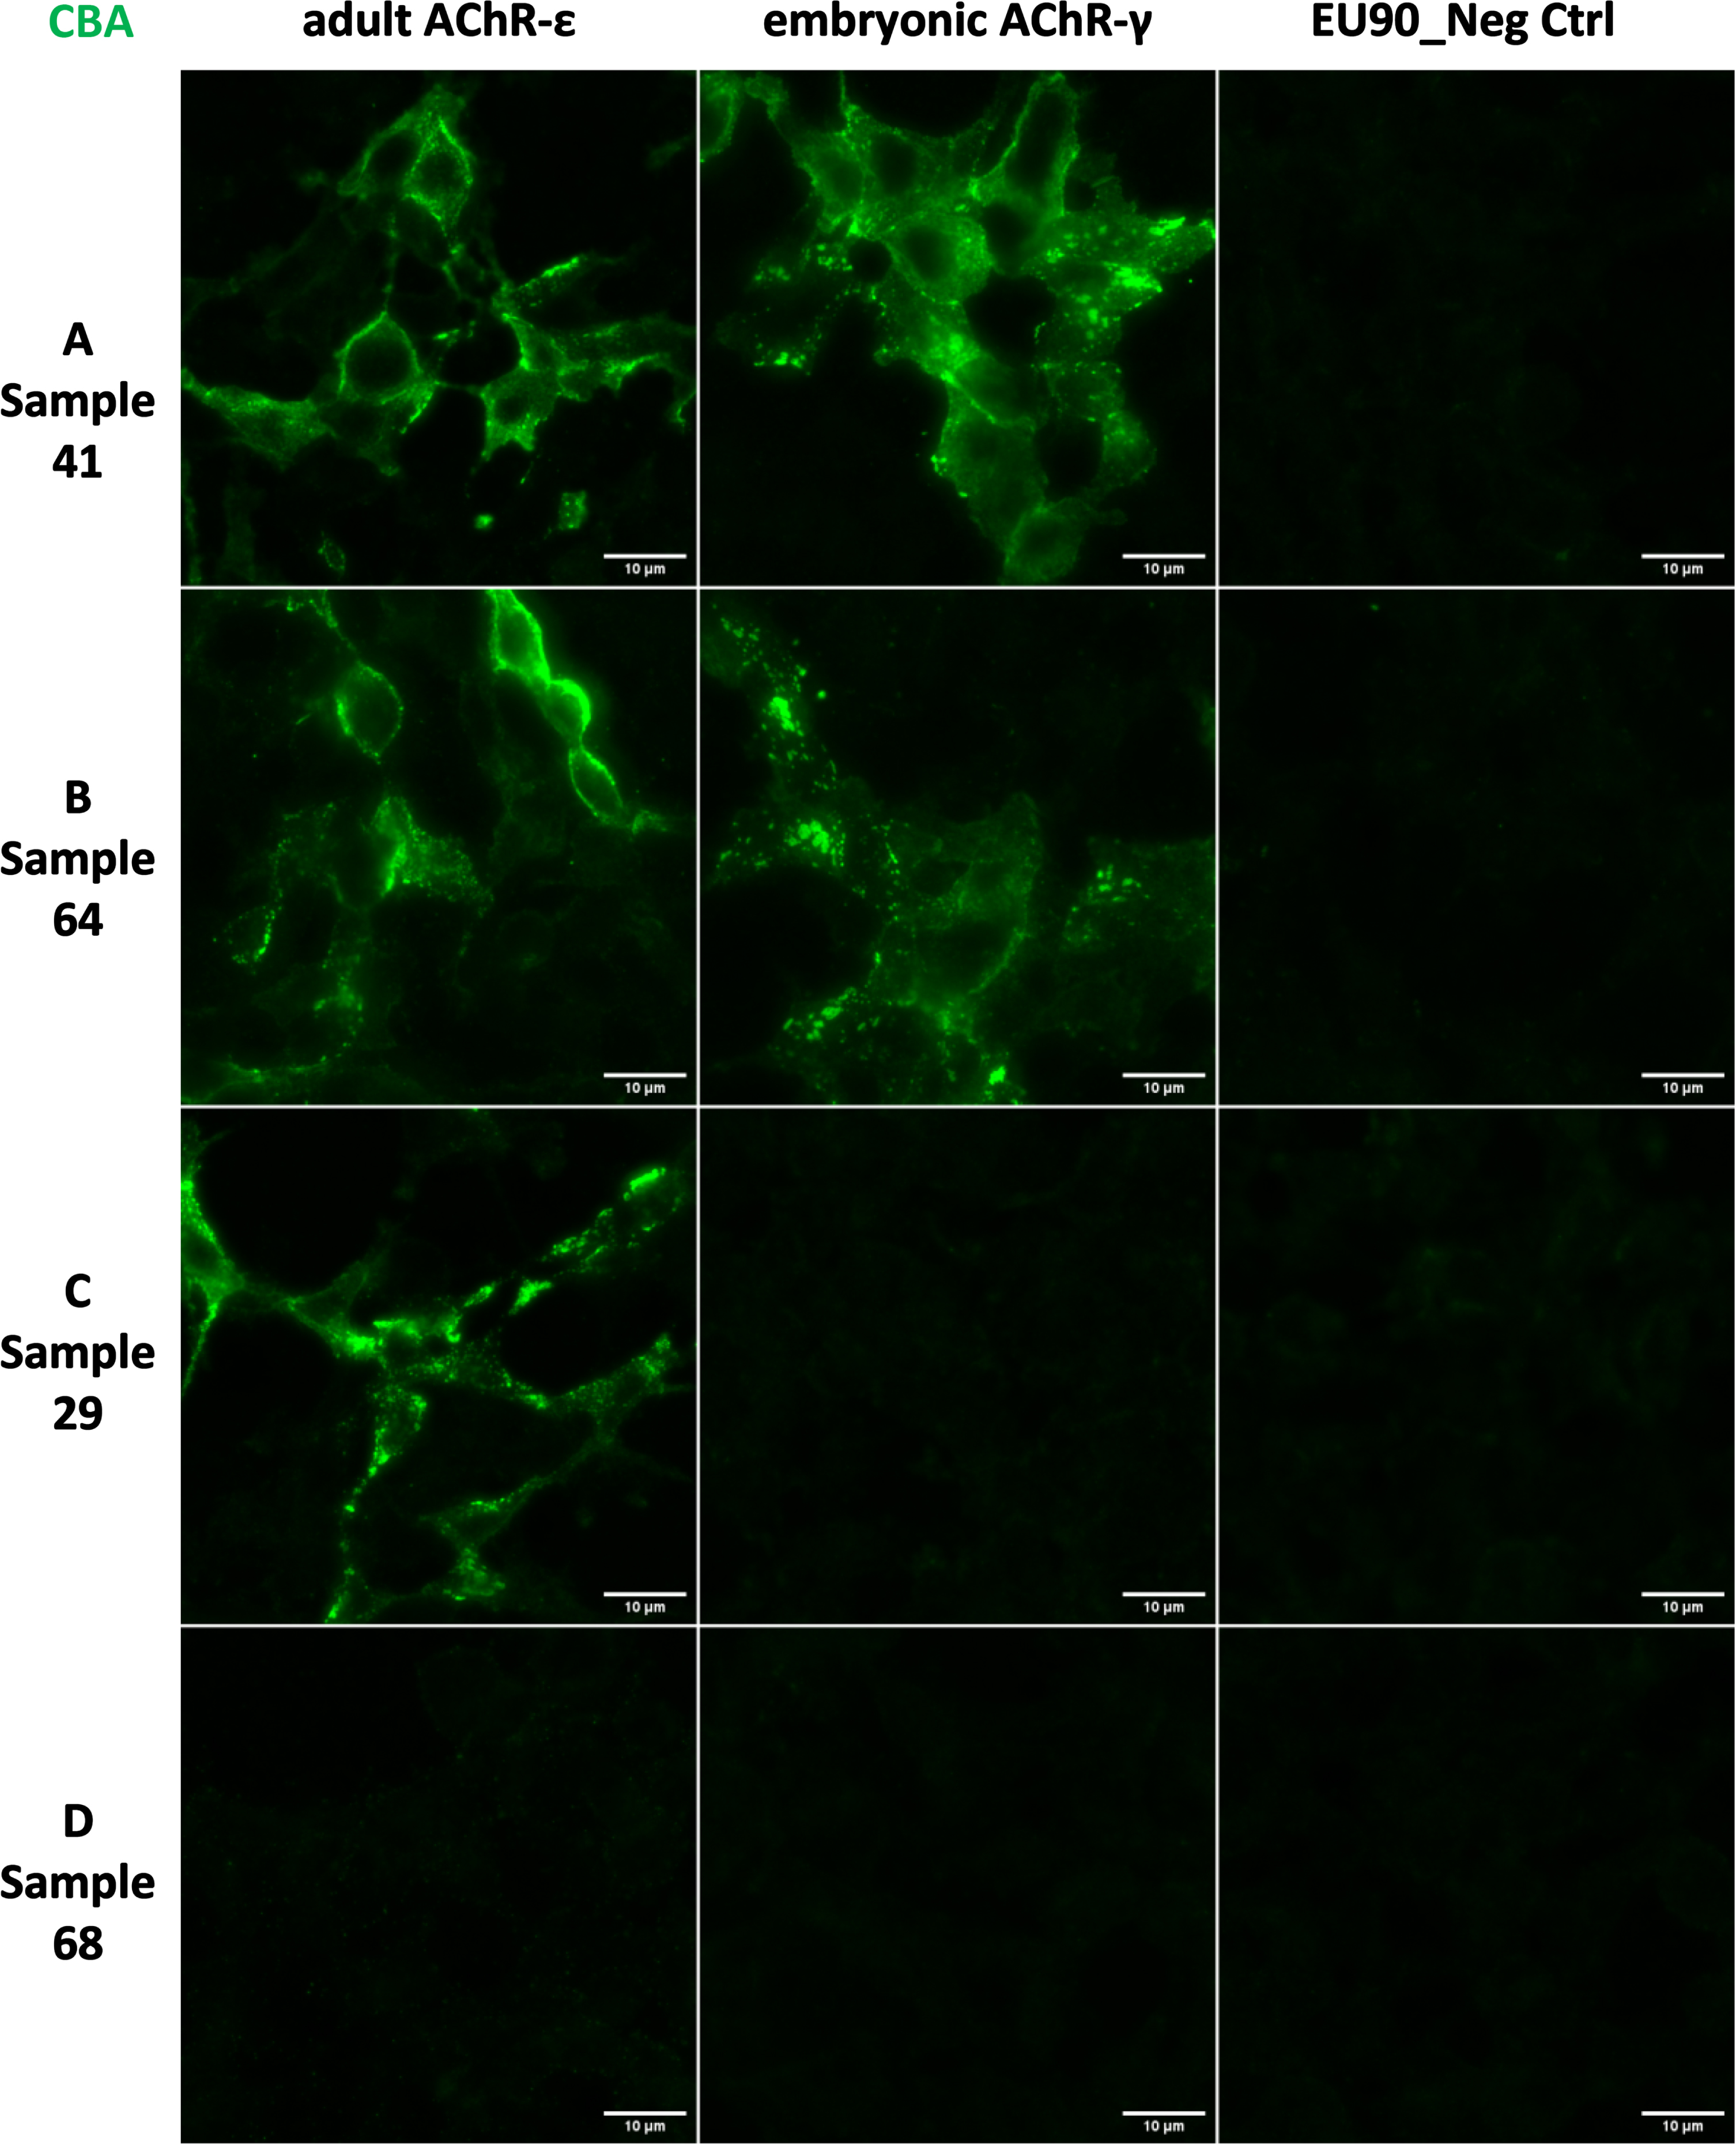 Anti-nAChR reactivity by the fixed Cell-Based Assay (CBA). Indirect Immunofluorescence analysis with EU90 cells expressing adult AChR-ɛ or embryonic AChR-γ. (A and B) Examples of samples with reactivity for adult and embryonic AChR. (C) Example of a sample with reactivity only for adult ɛ. (D) Example of a sample without any reactivity. Scale bars = 10μm.